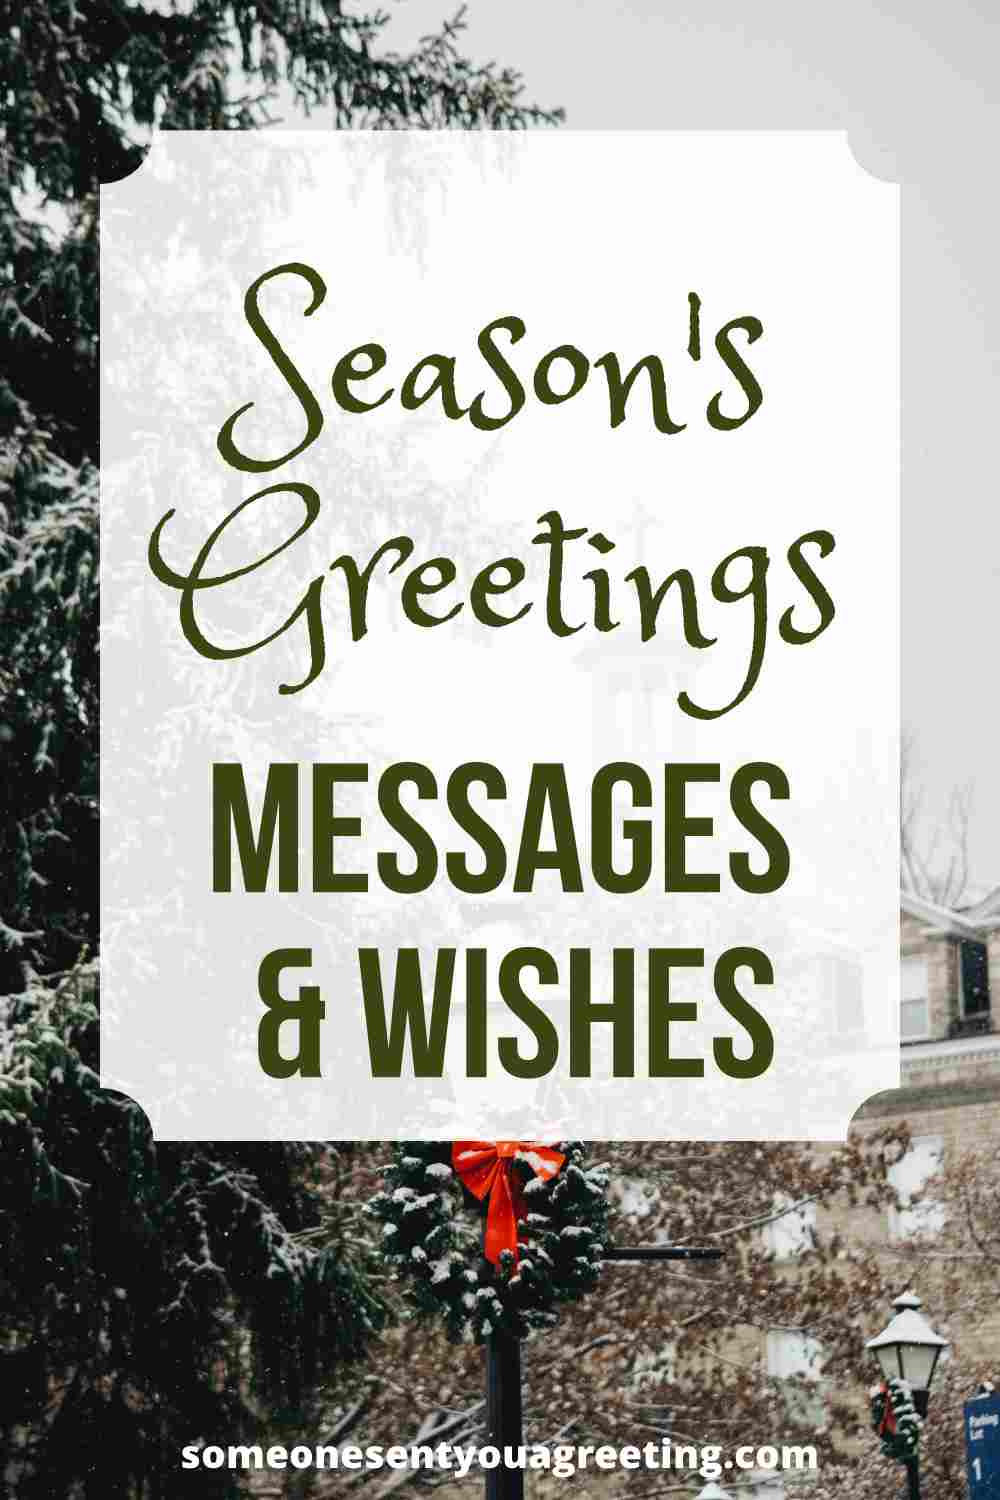 Season’s Greetings Messages and Wishes